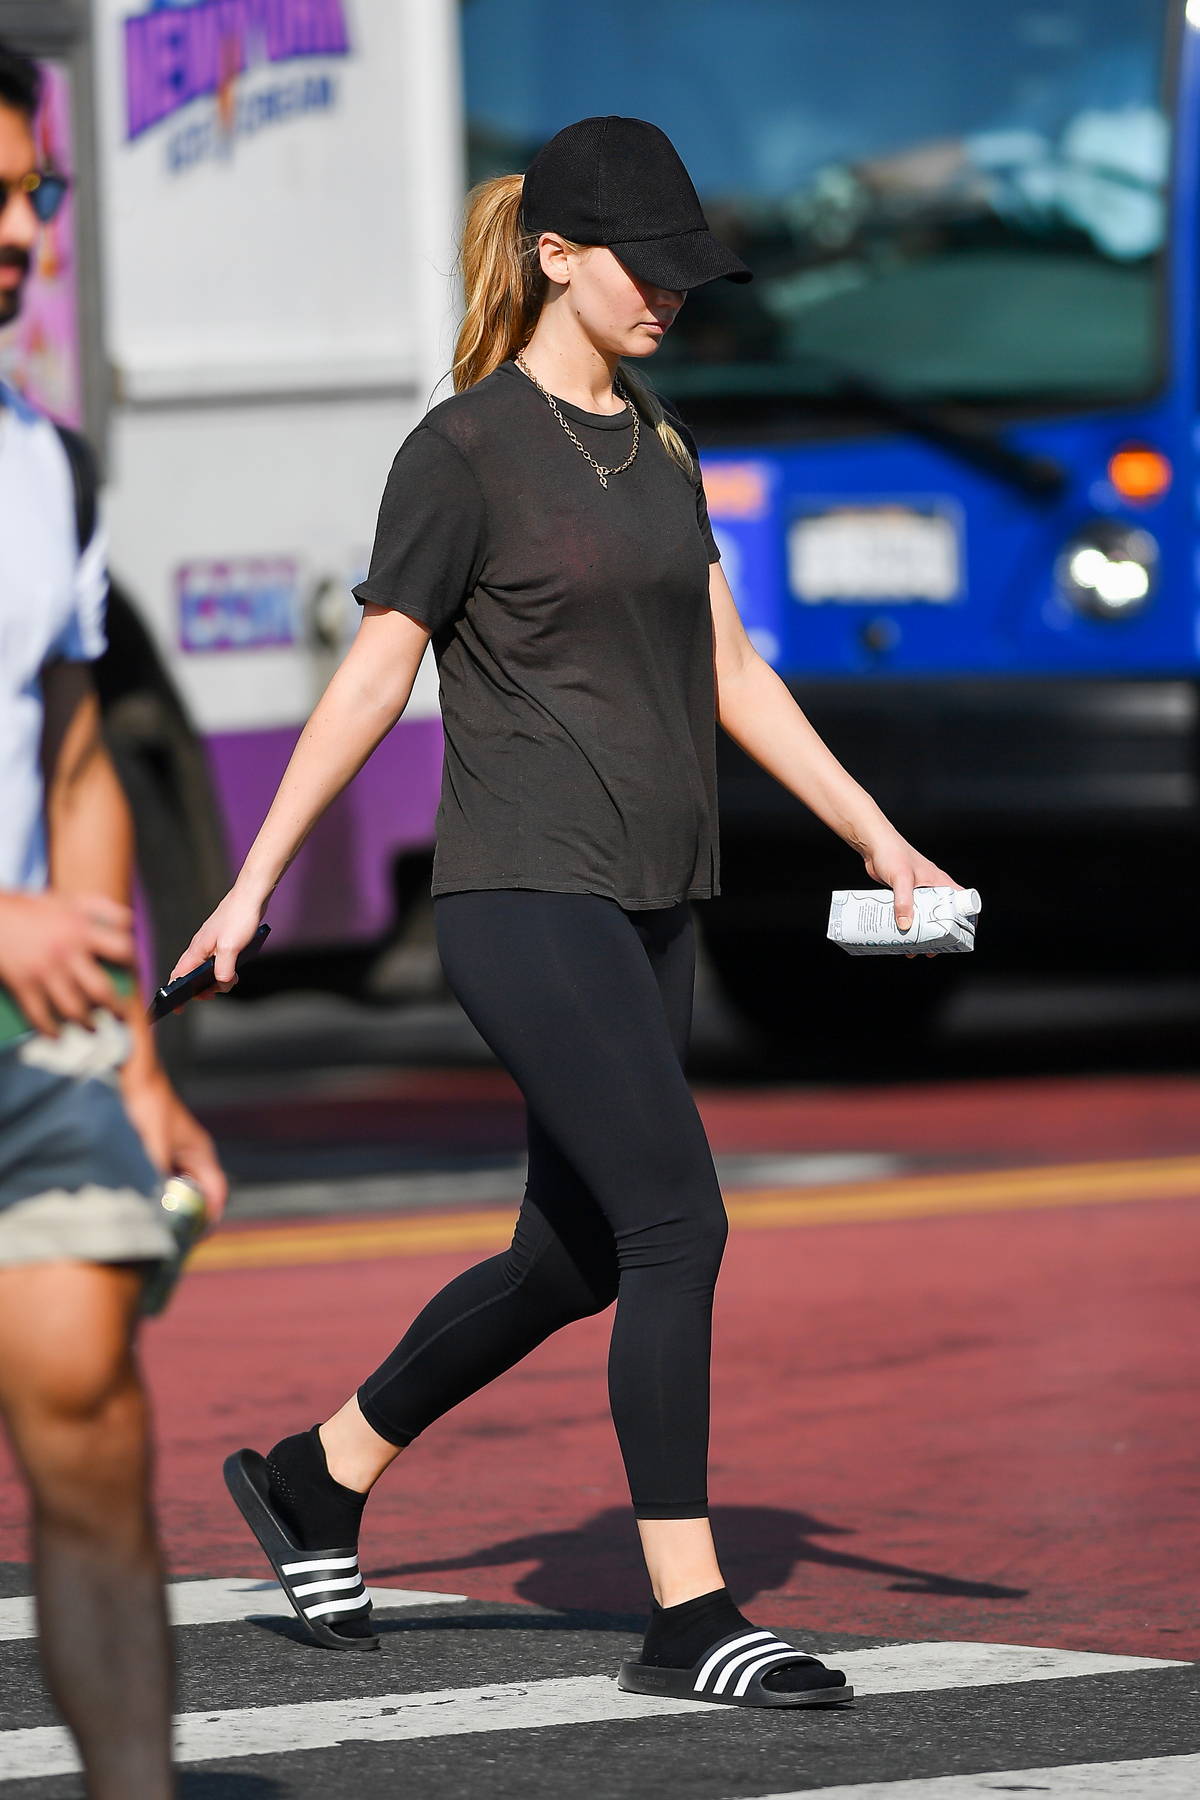 https://www.celebsfirst.com/wp-content/uploads/2023/06/Jennifer-Lawrence-wears-a-black-t-shirt-with-matching-leggings-while-heading-to-the-Gym-in-New-York-City-020623_3.jpg